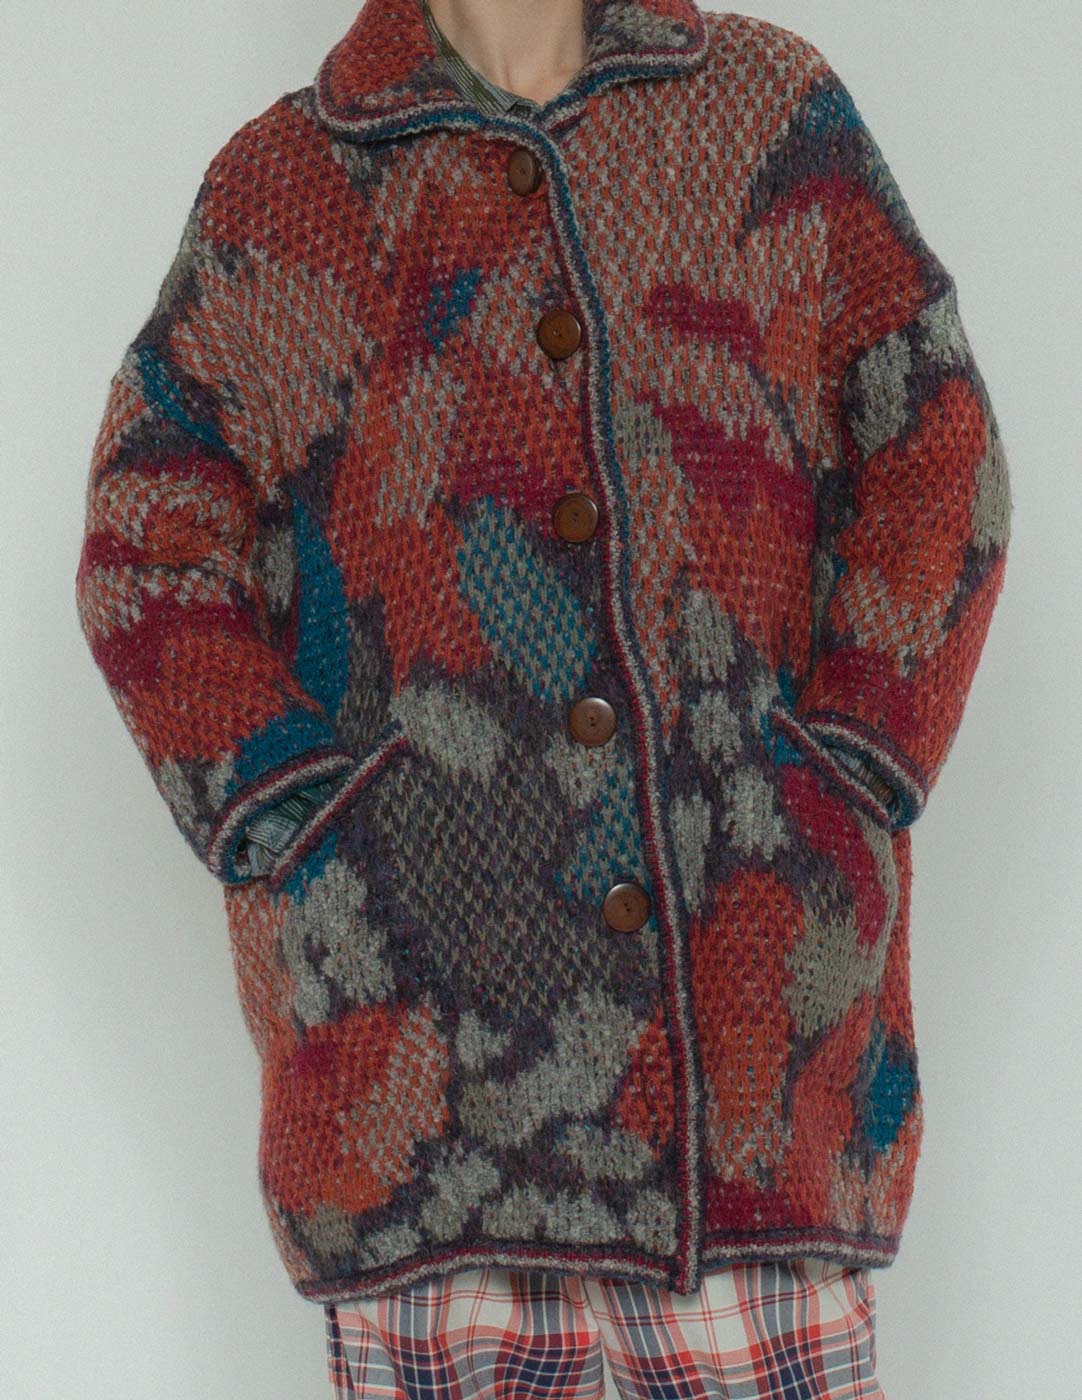 Missoni vintage abstract patterned cardi coat front detail